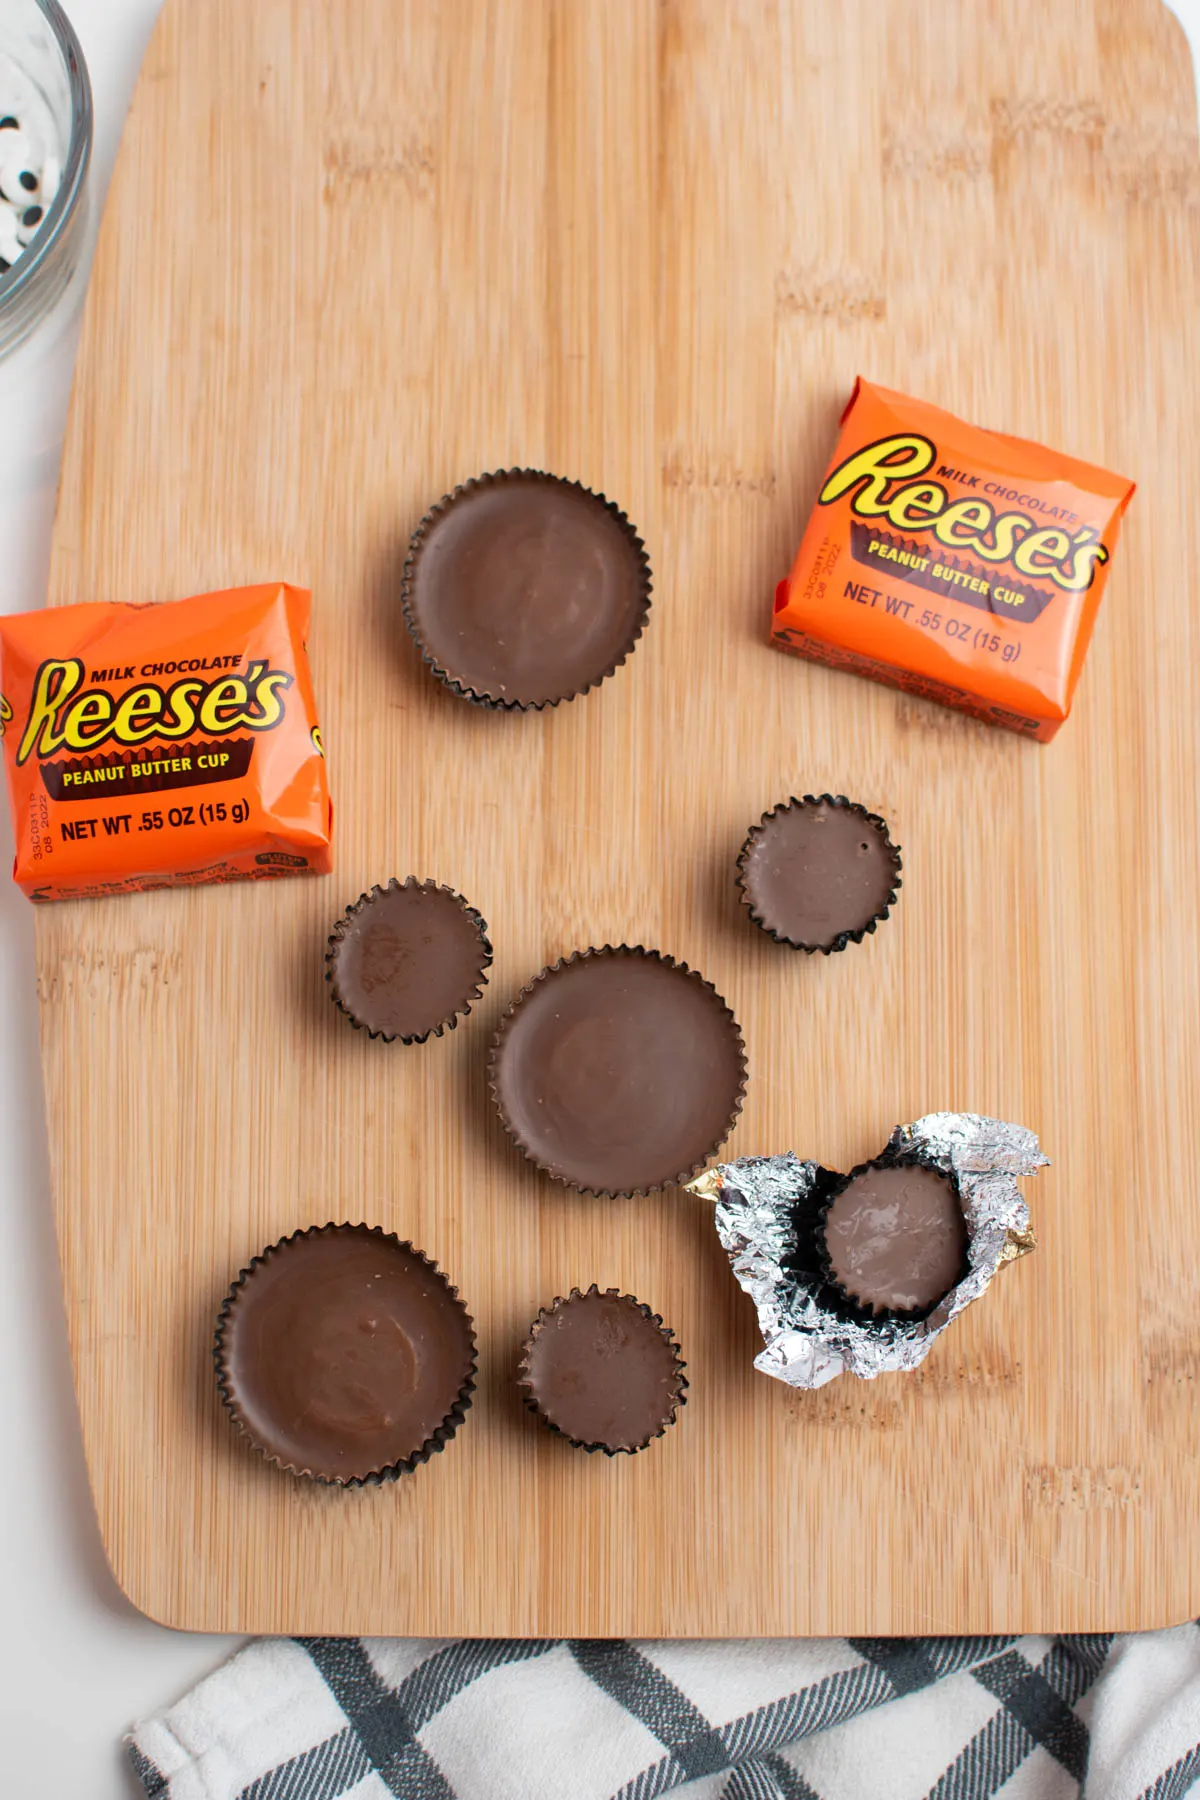 Unwrapped Reese's snack and miniature cups on wood cutting board.